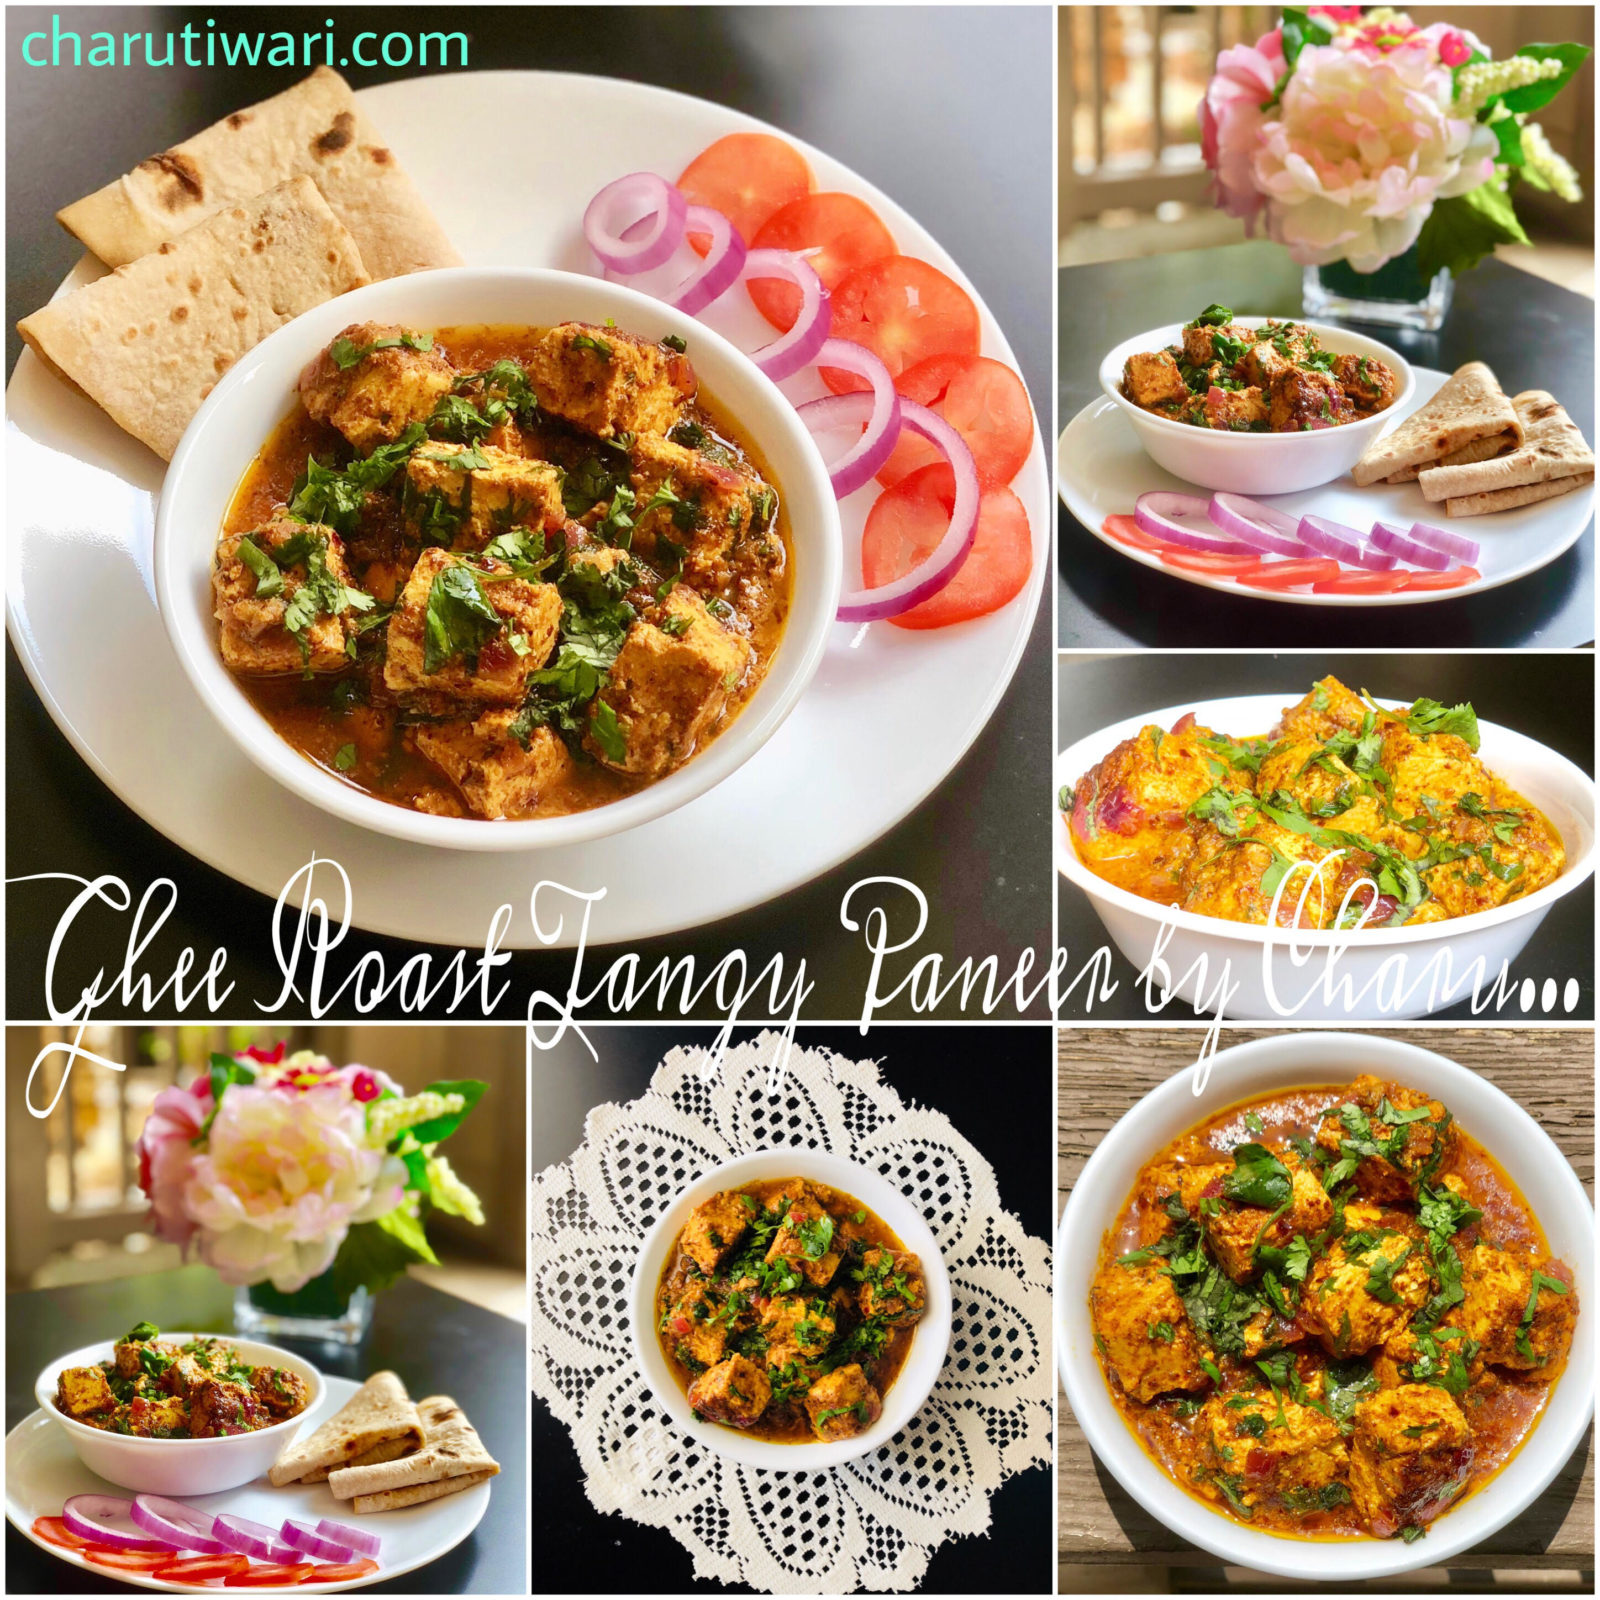 Ghee Roasted Tangy Paneer-Served with Roti